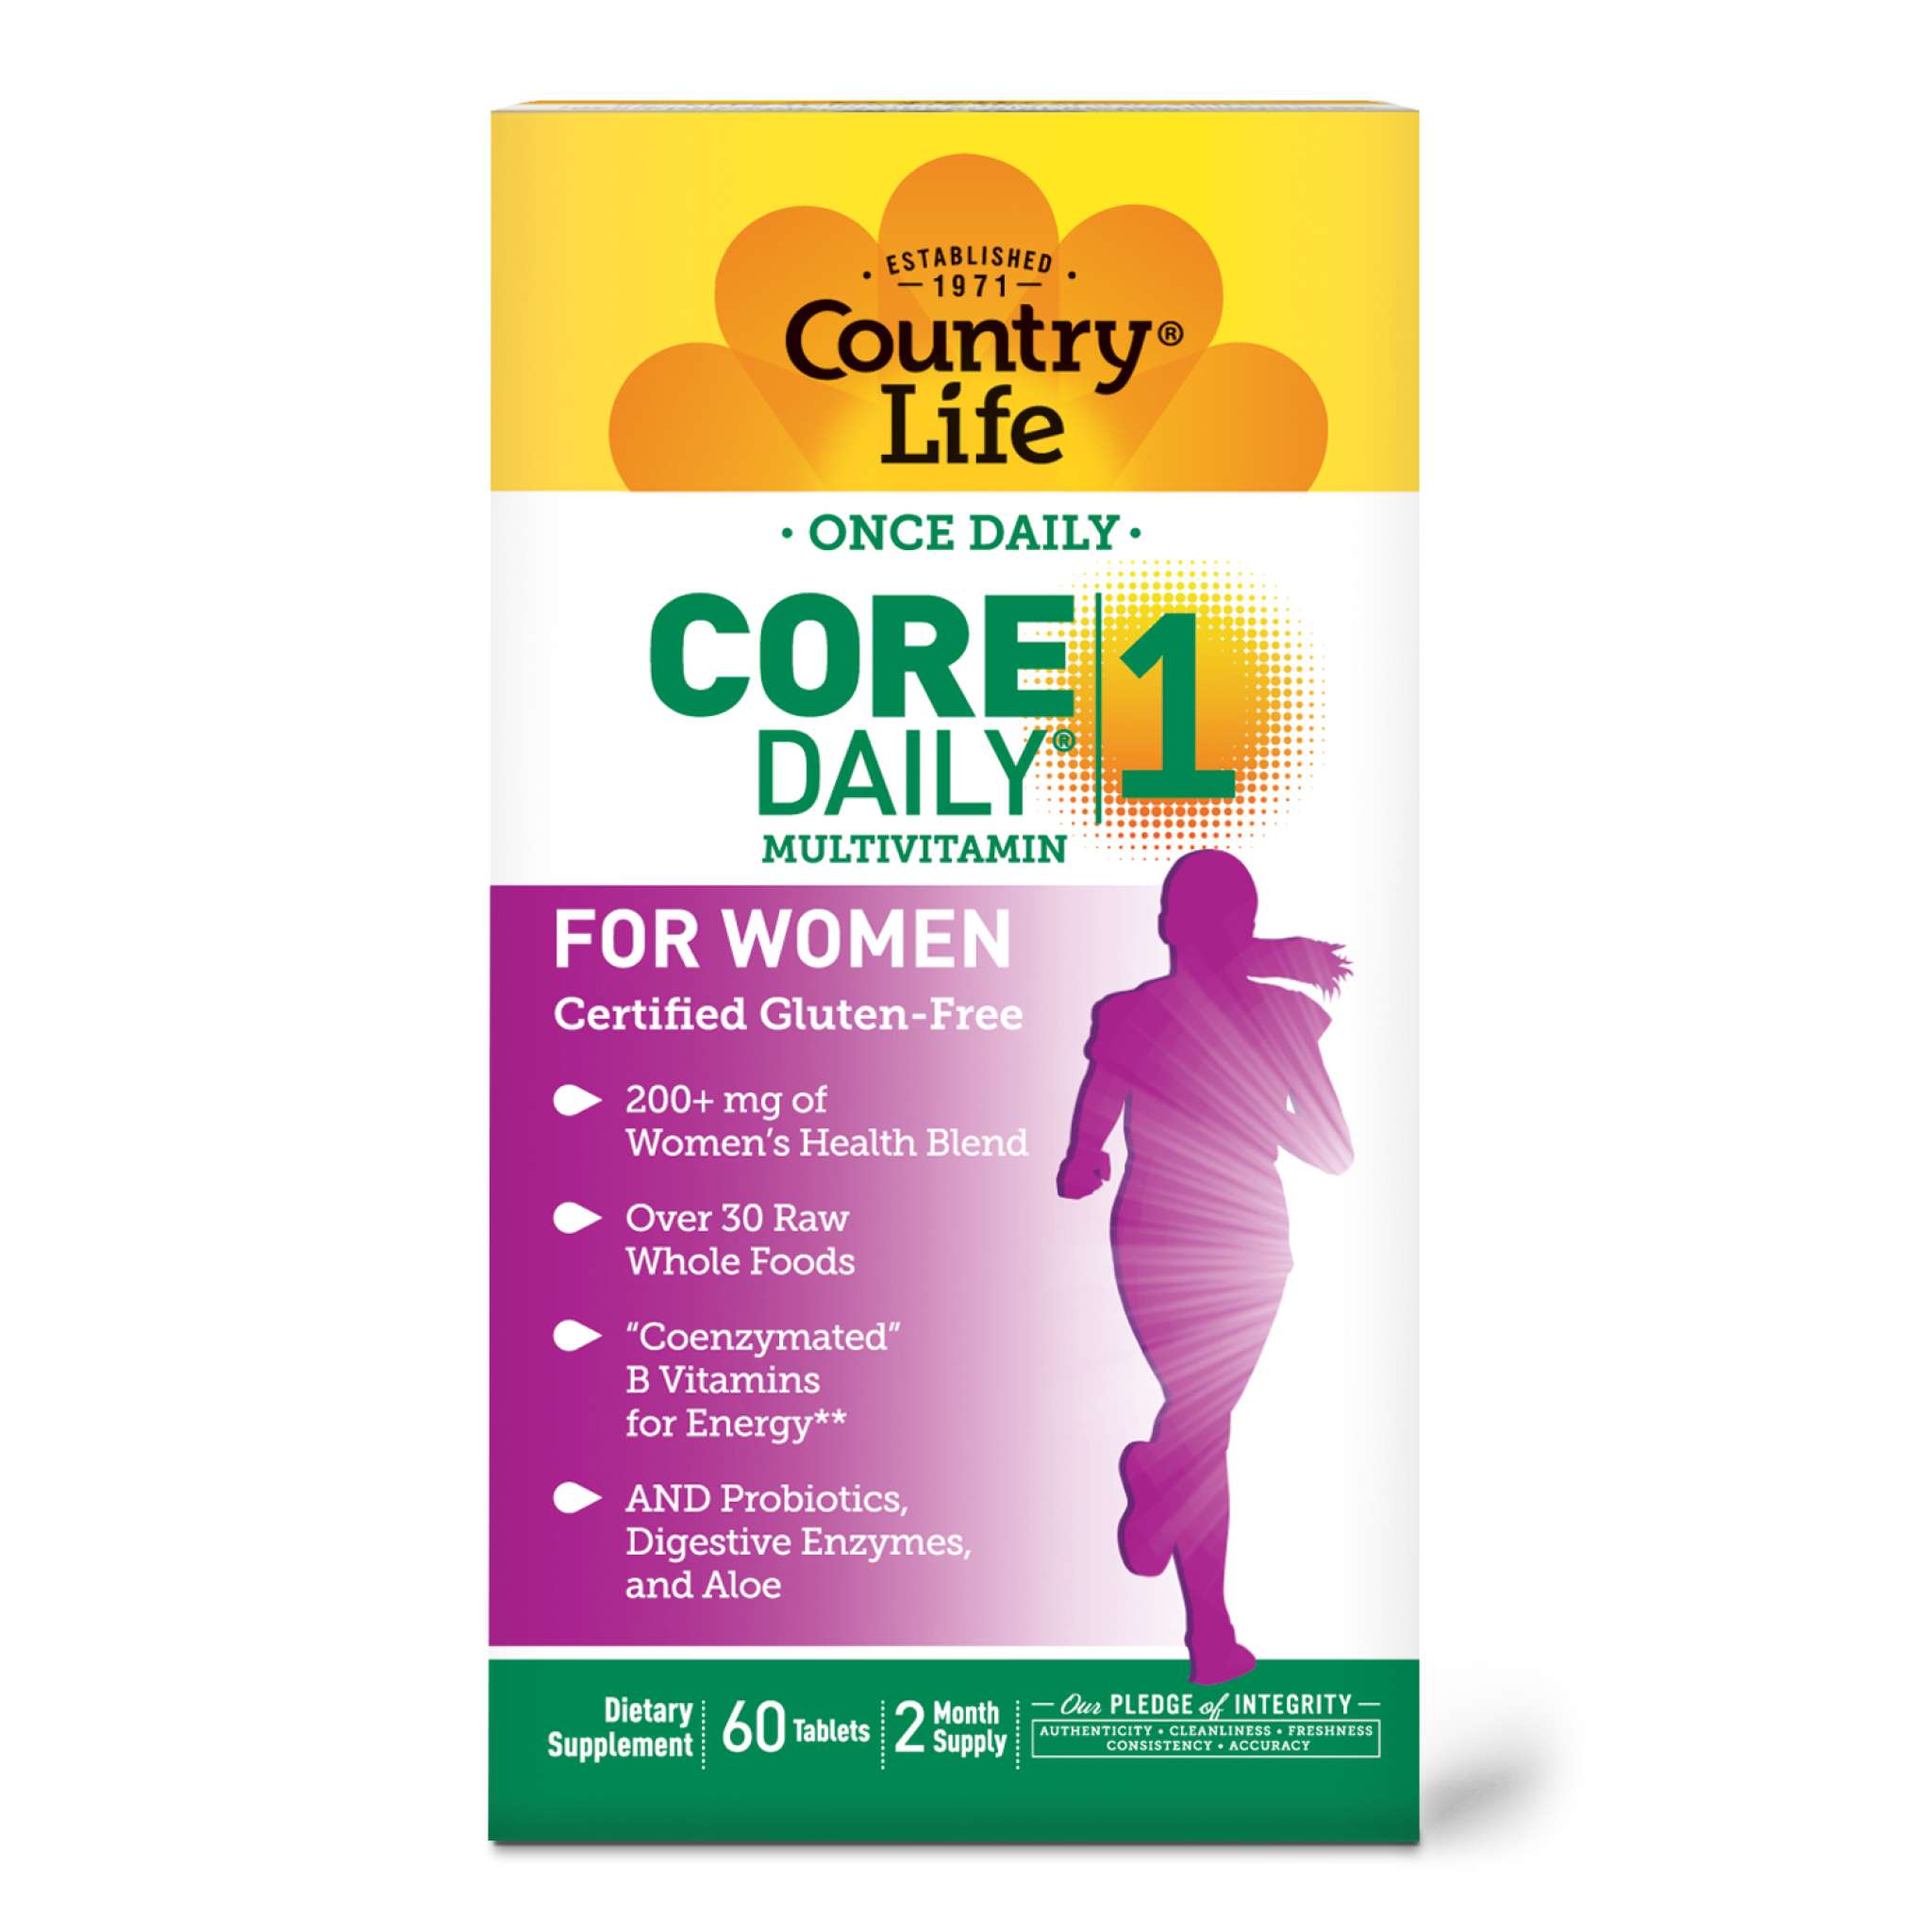 Country Life - Core Daily 1 For Women